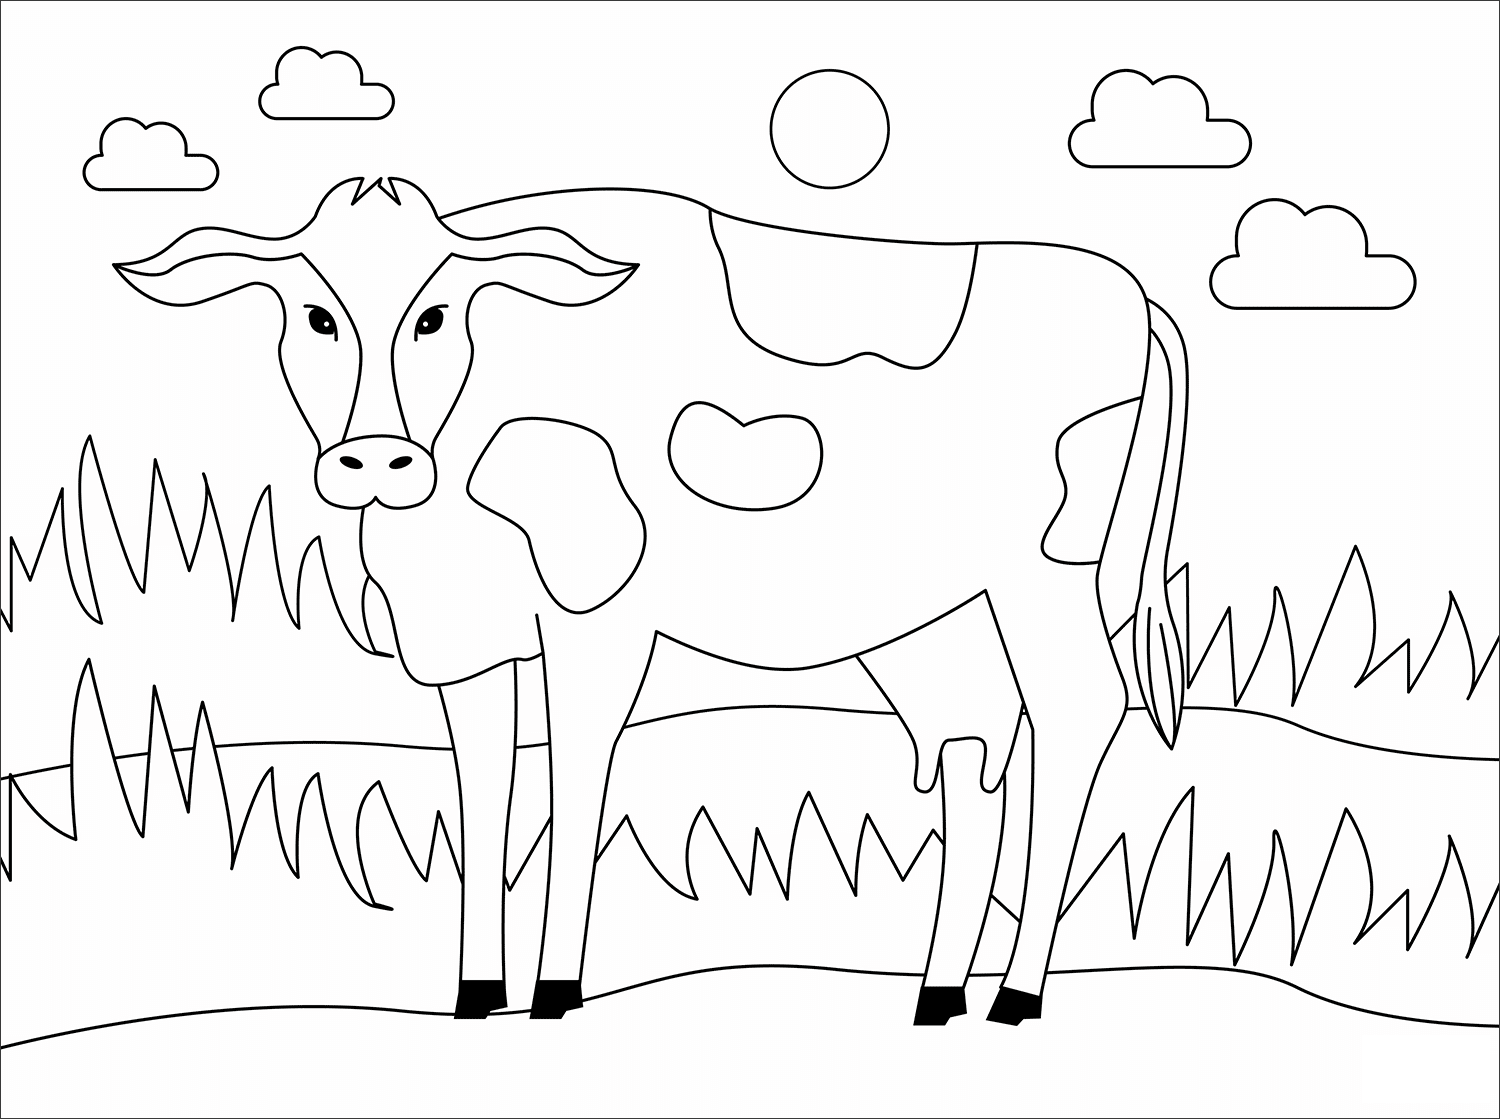 Cow Animal Simple Coloring Page